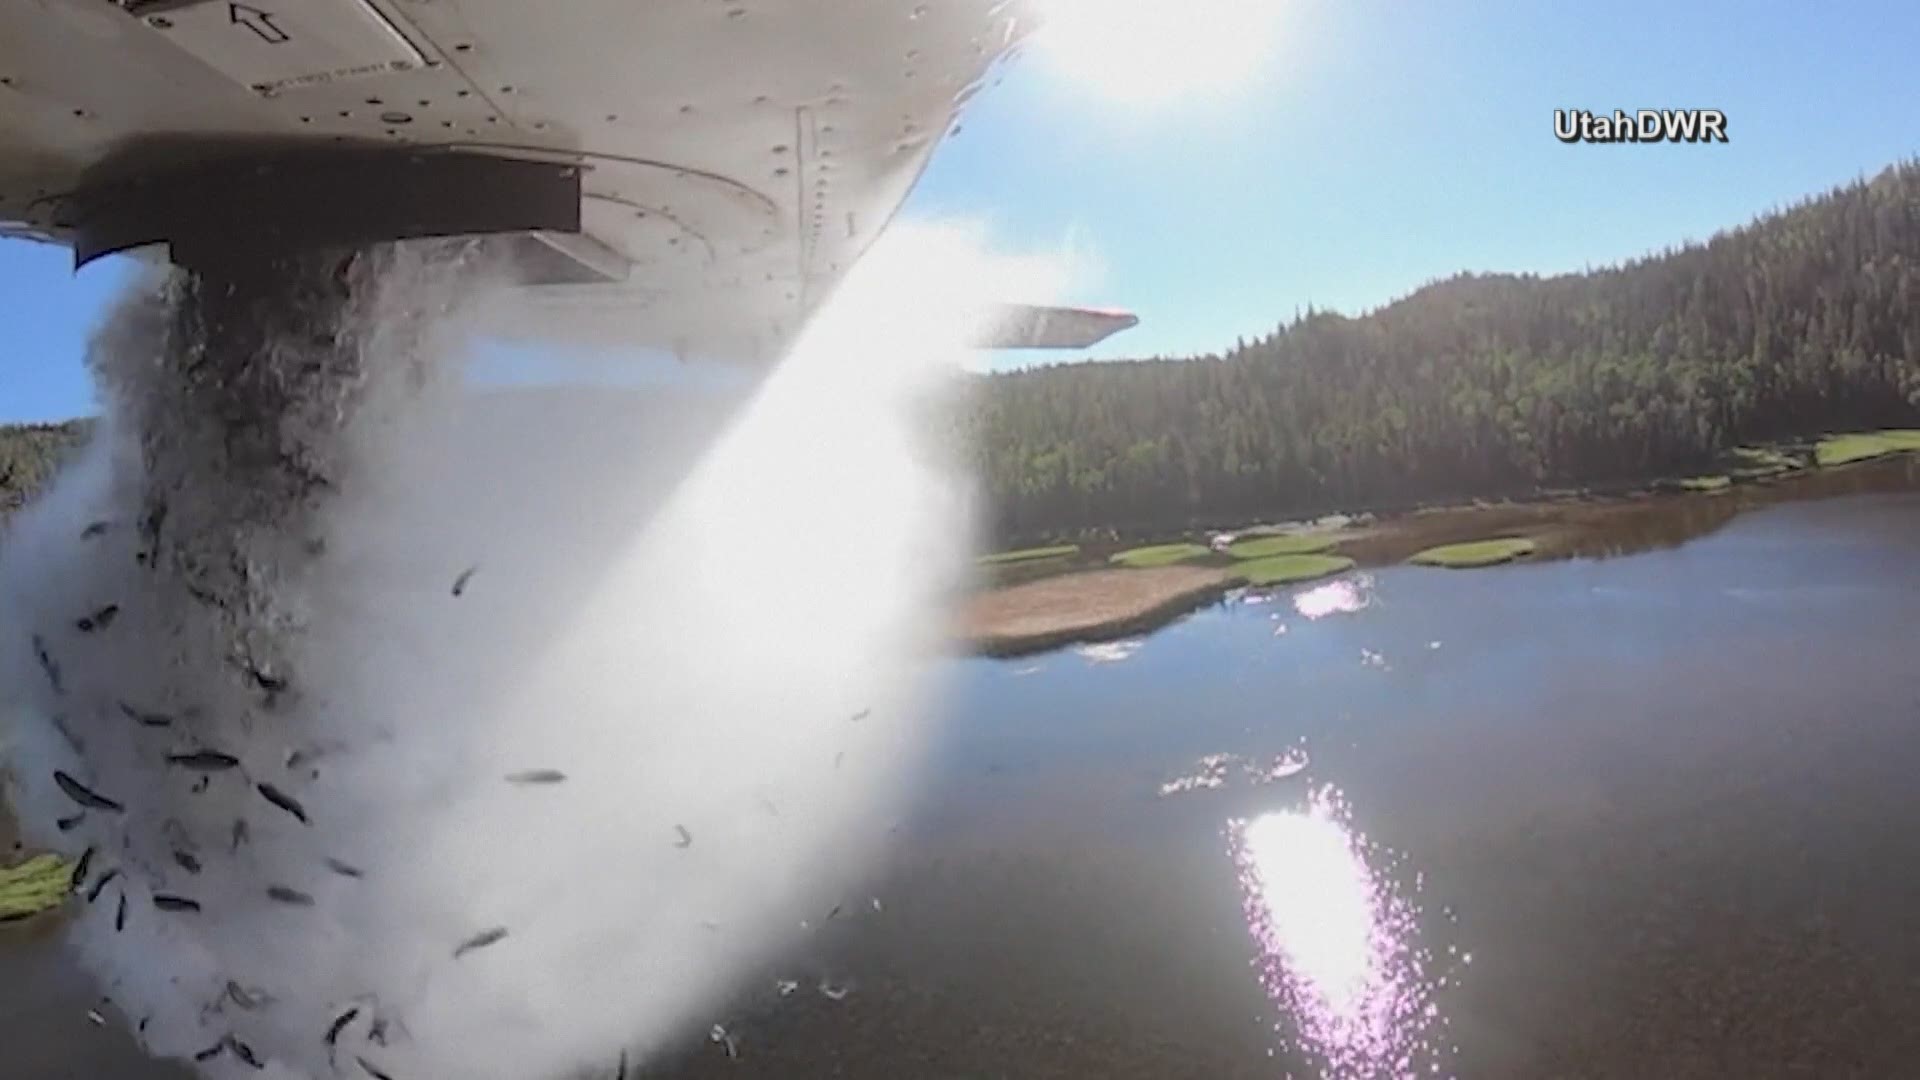 Utah's Divison of Wildlife Resources dropped thousands of fish into high elevation lakes. The division said the aerial method is quicker and less stressful.